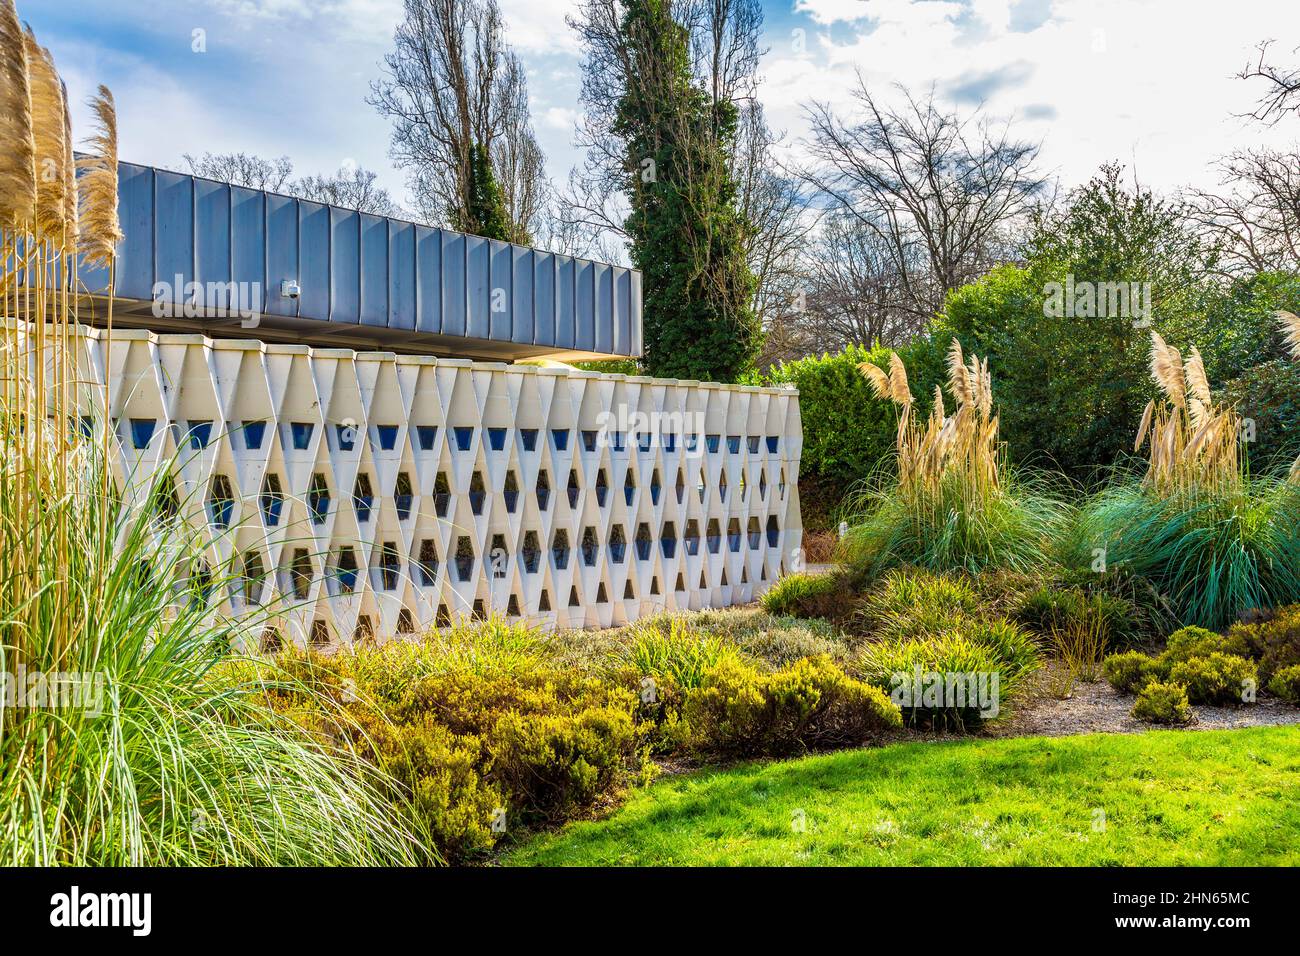 1970s style crematorium building designed by E. G. Chandler at City of London Cemetery and Crematorium, Manor Park, Newham, London, UK Stock Photo